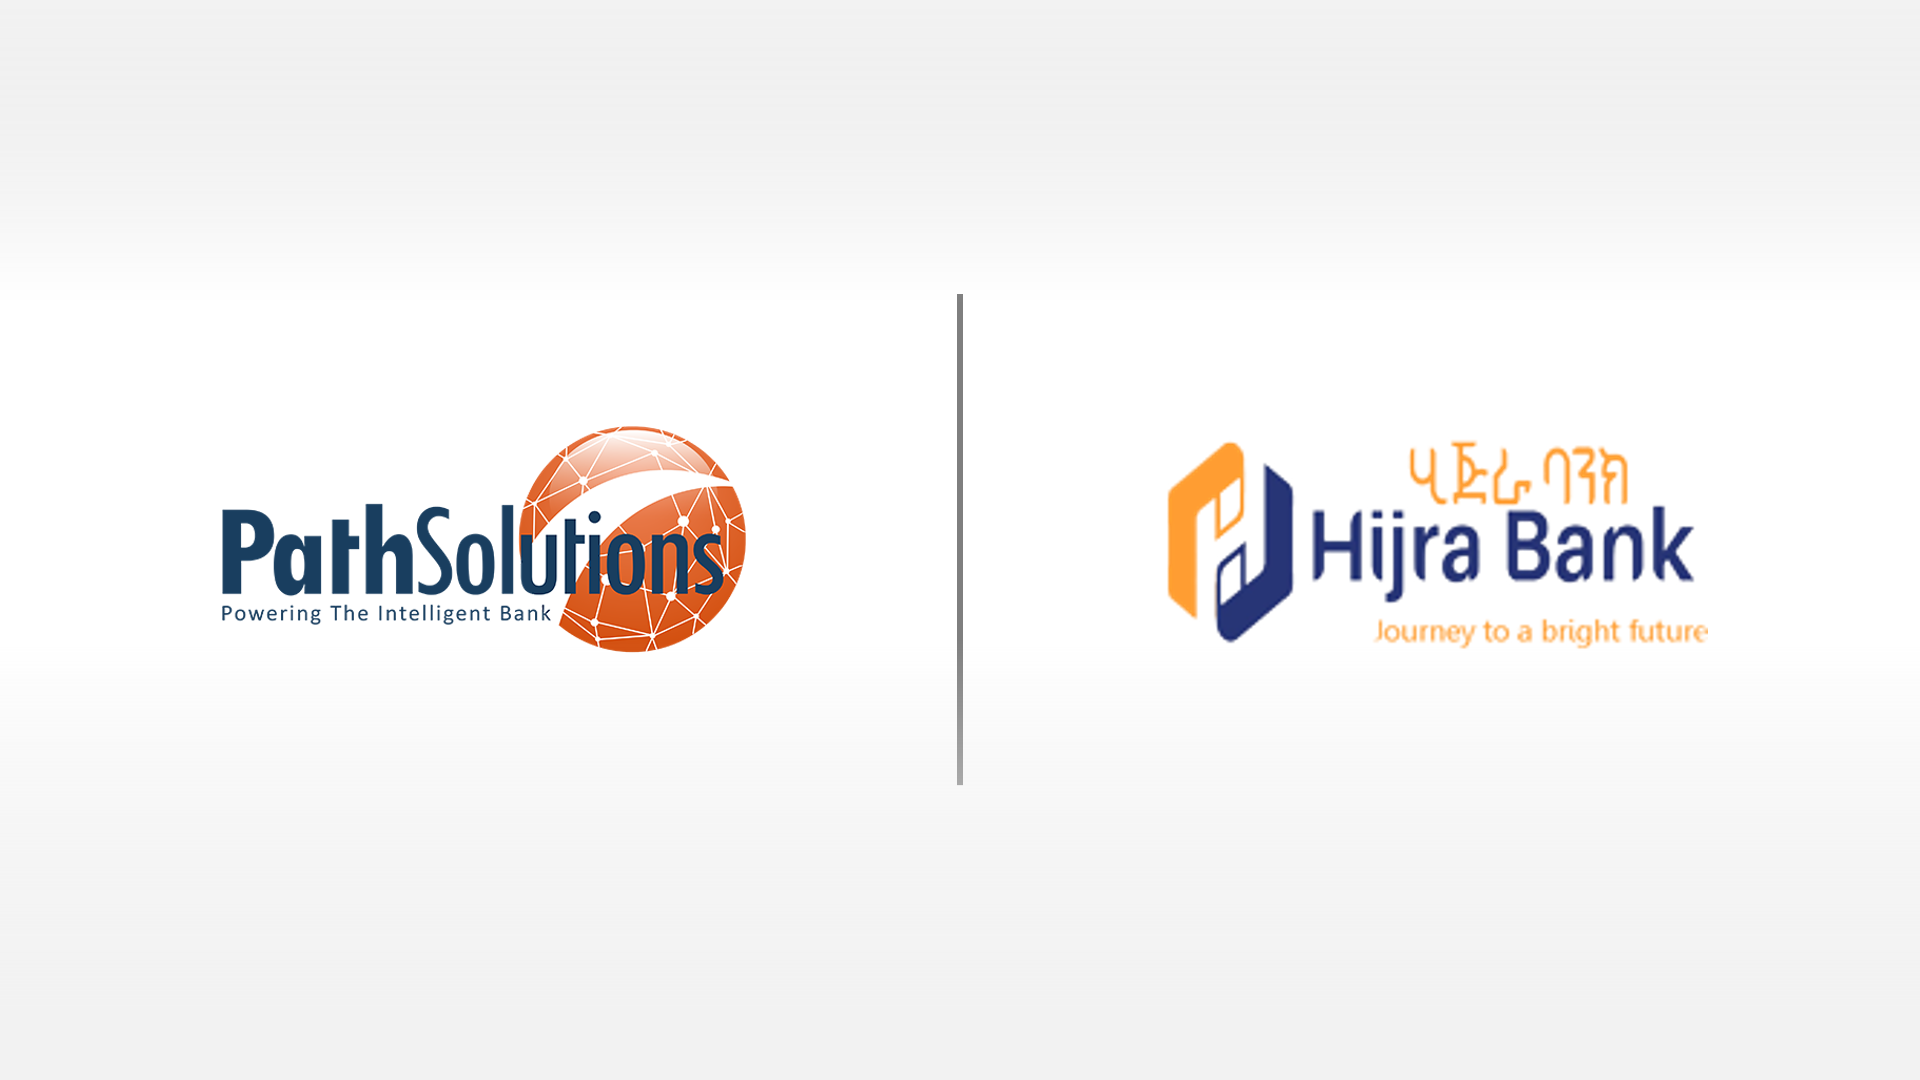  The one-month project implementation at Hijra Bank is now complete